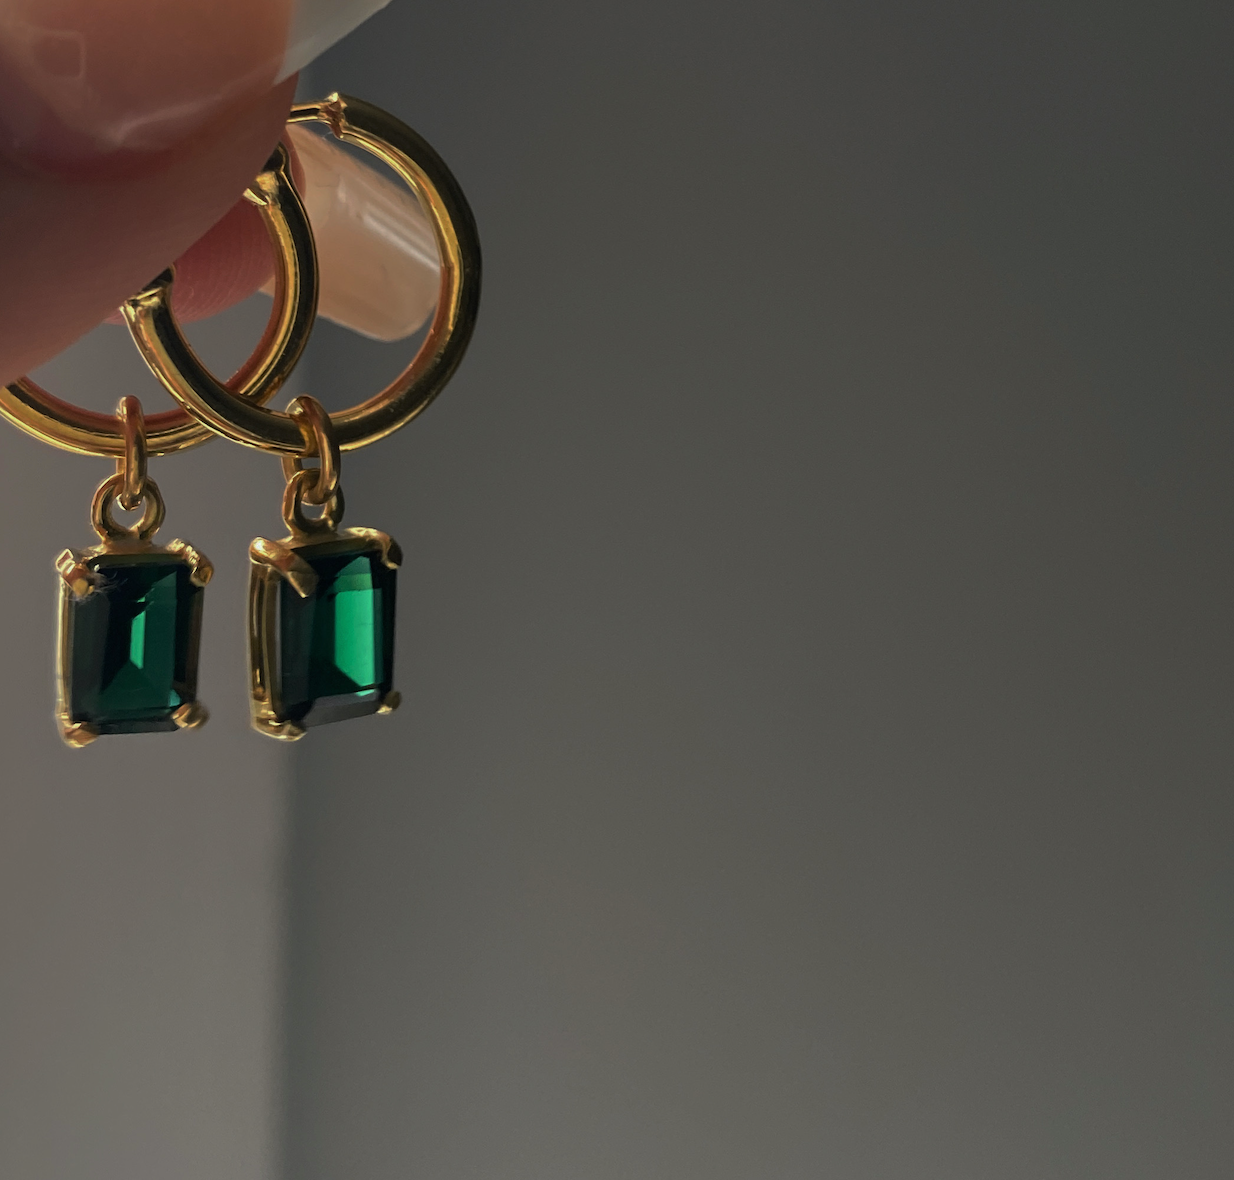 18K Gold Plated Green Quartz Hoops Earrings featuring our green quartz stones